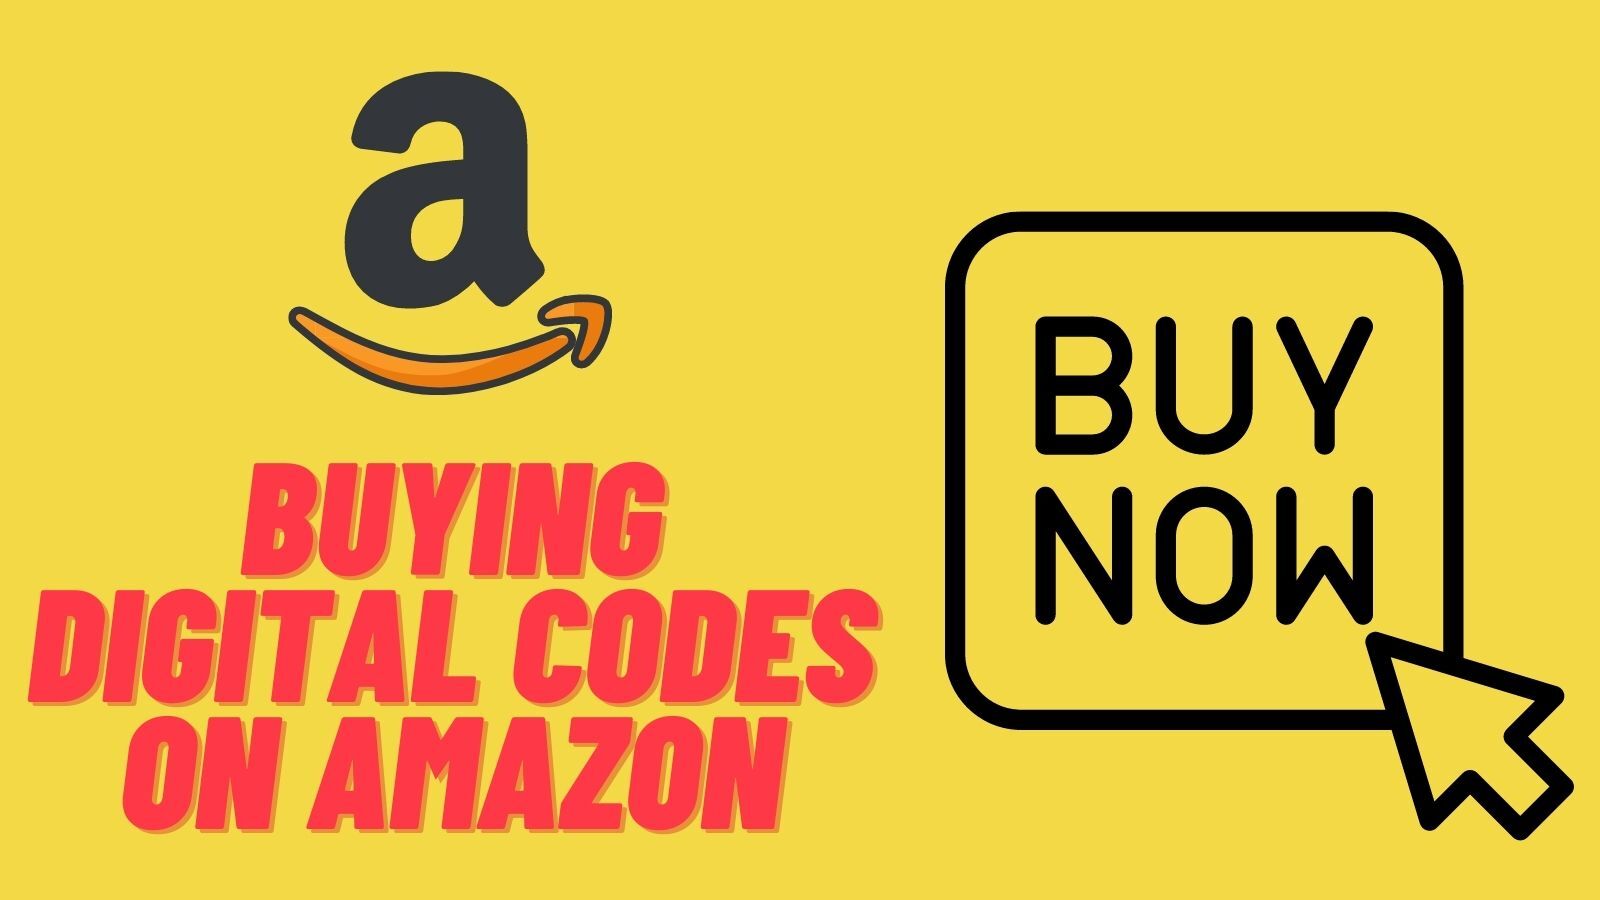 Buying Digital Codes On Amazon: How to Make It?